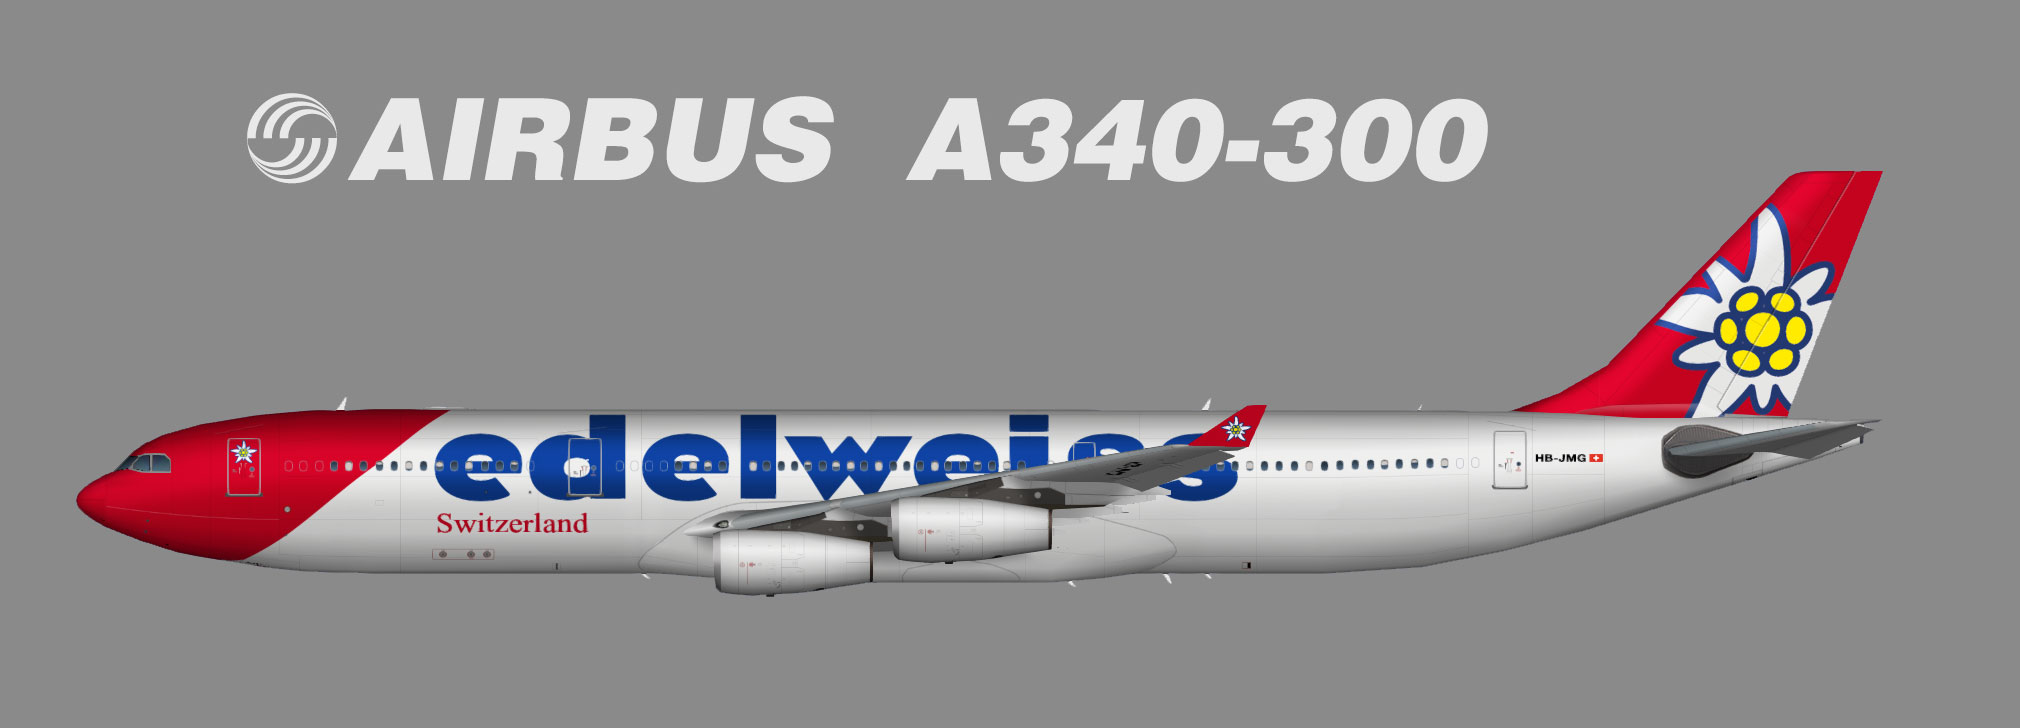 Edelweiss Airbus A340-300